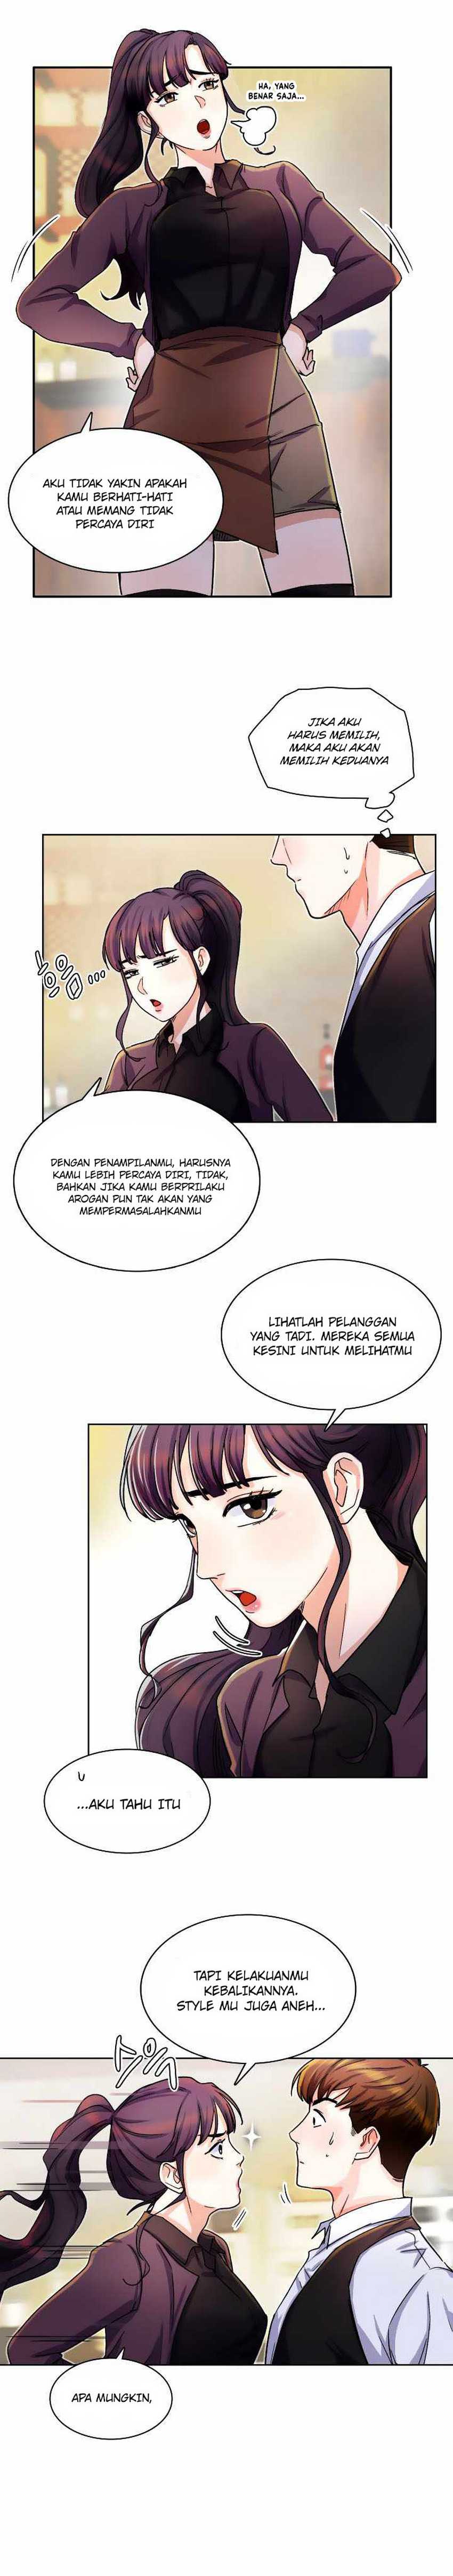 Road to Stardom Chapter 04